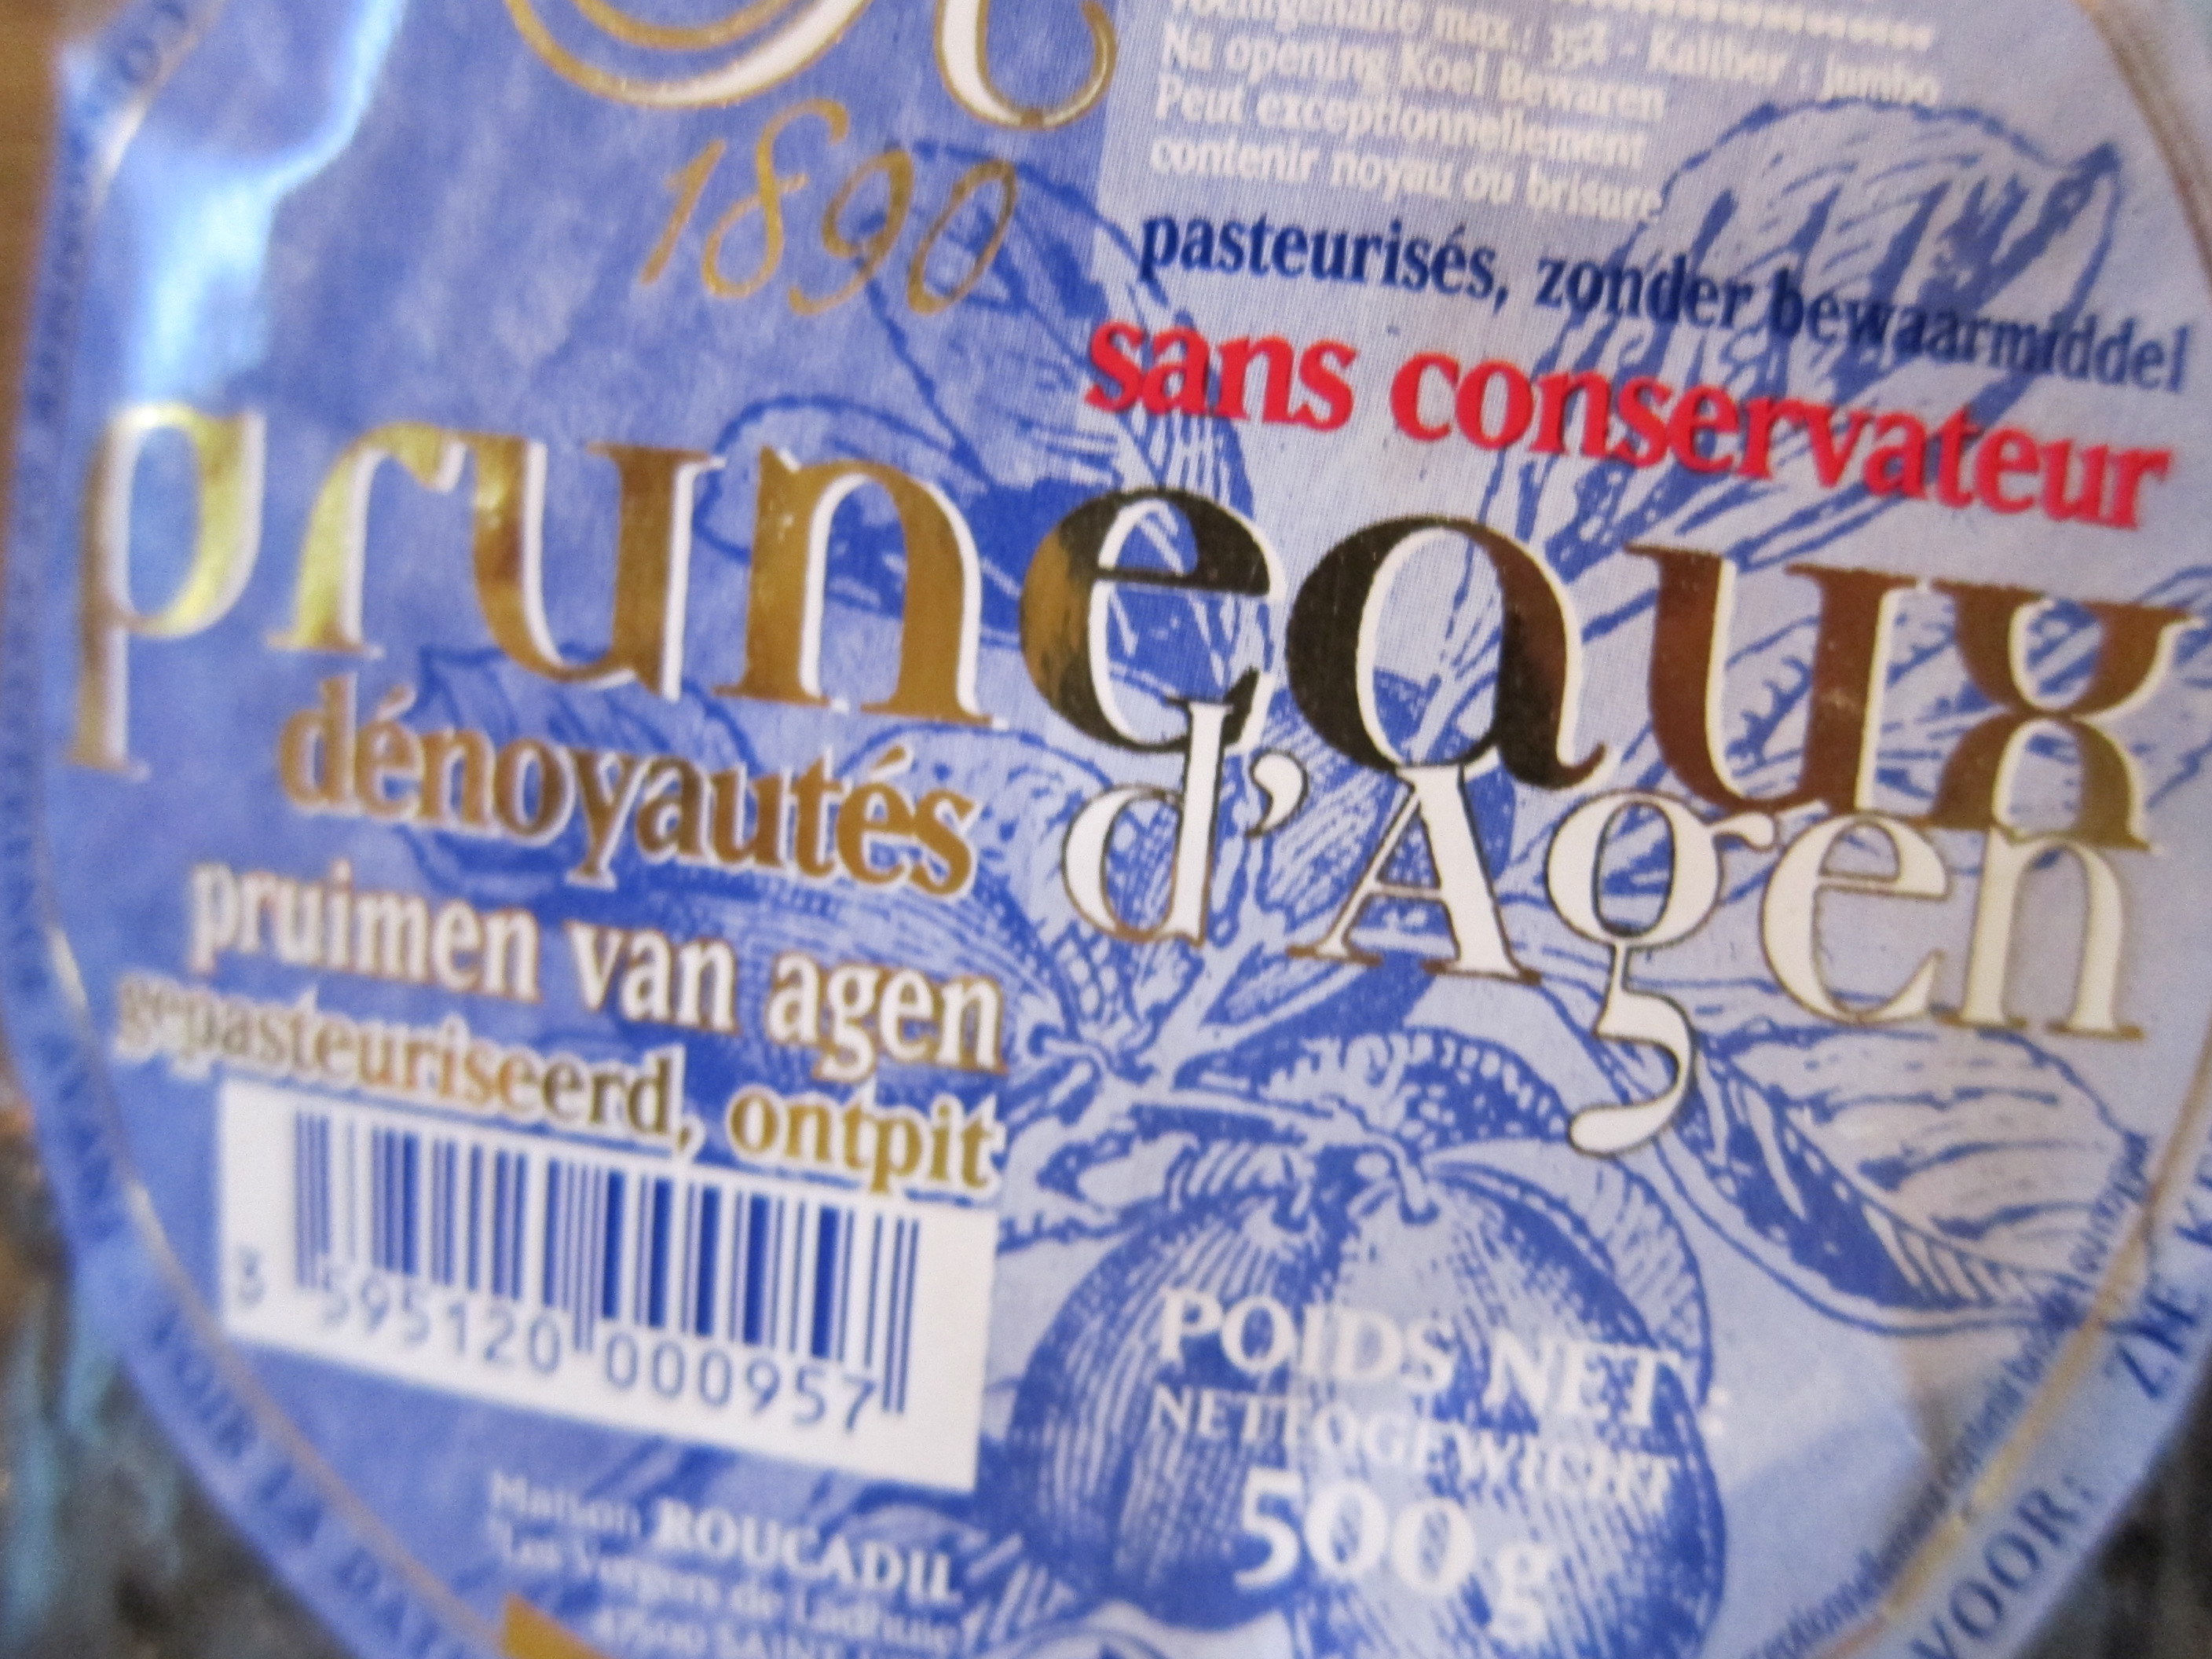 Going for the best: Prunes from Agen (in France)